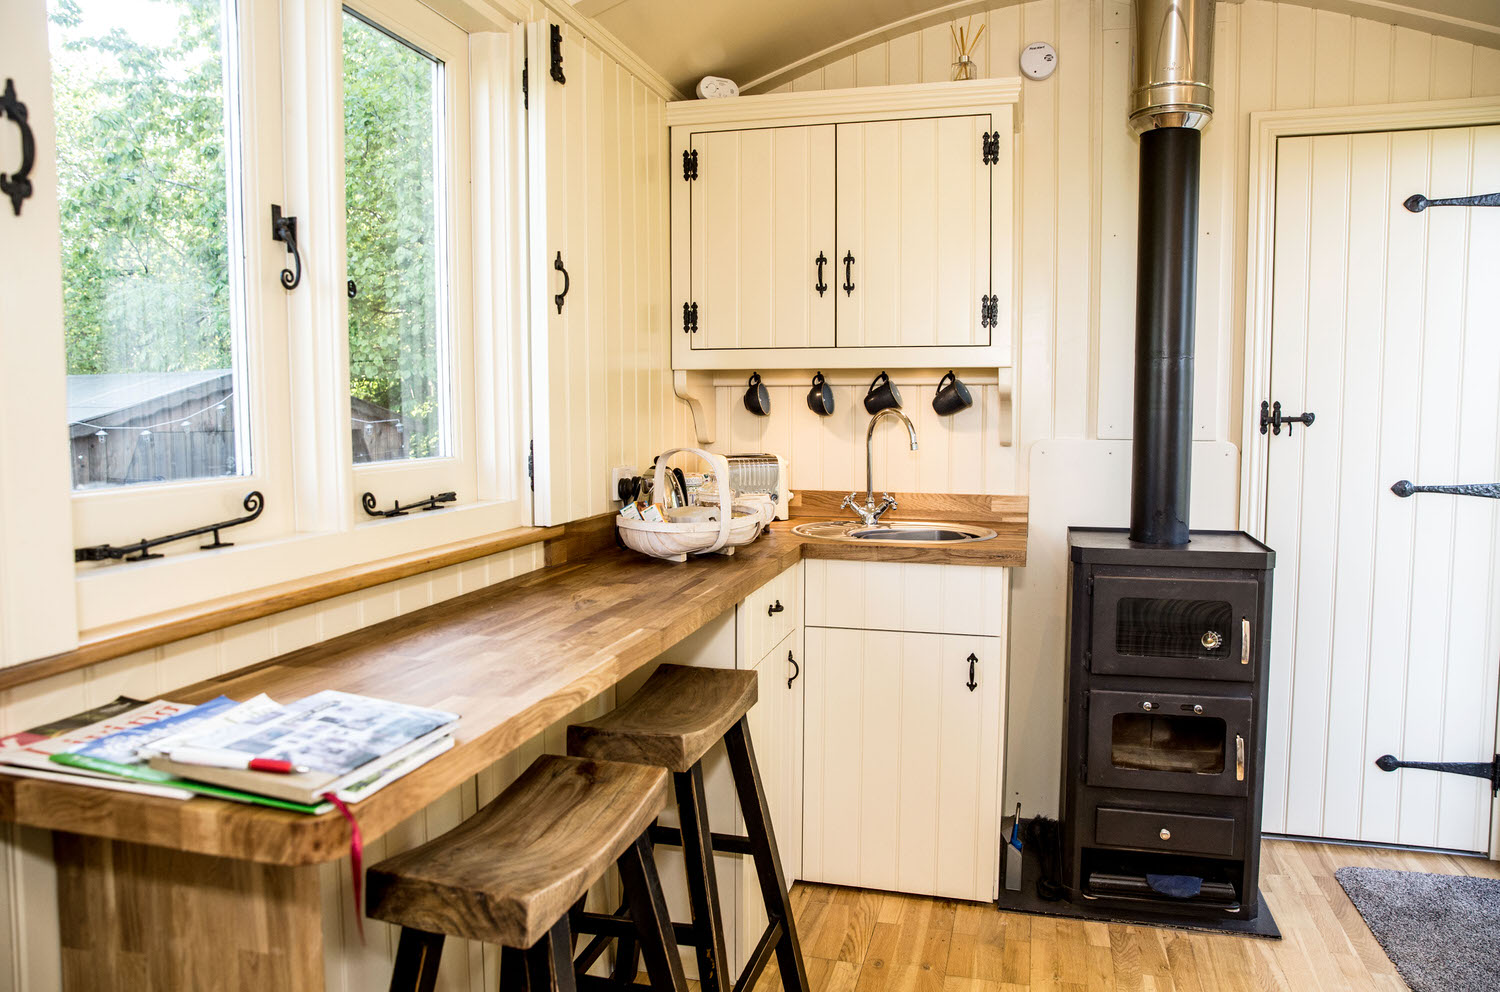 Yorkshire-Dales-Shepherds-Hut-with-Hot-Tub-18